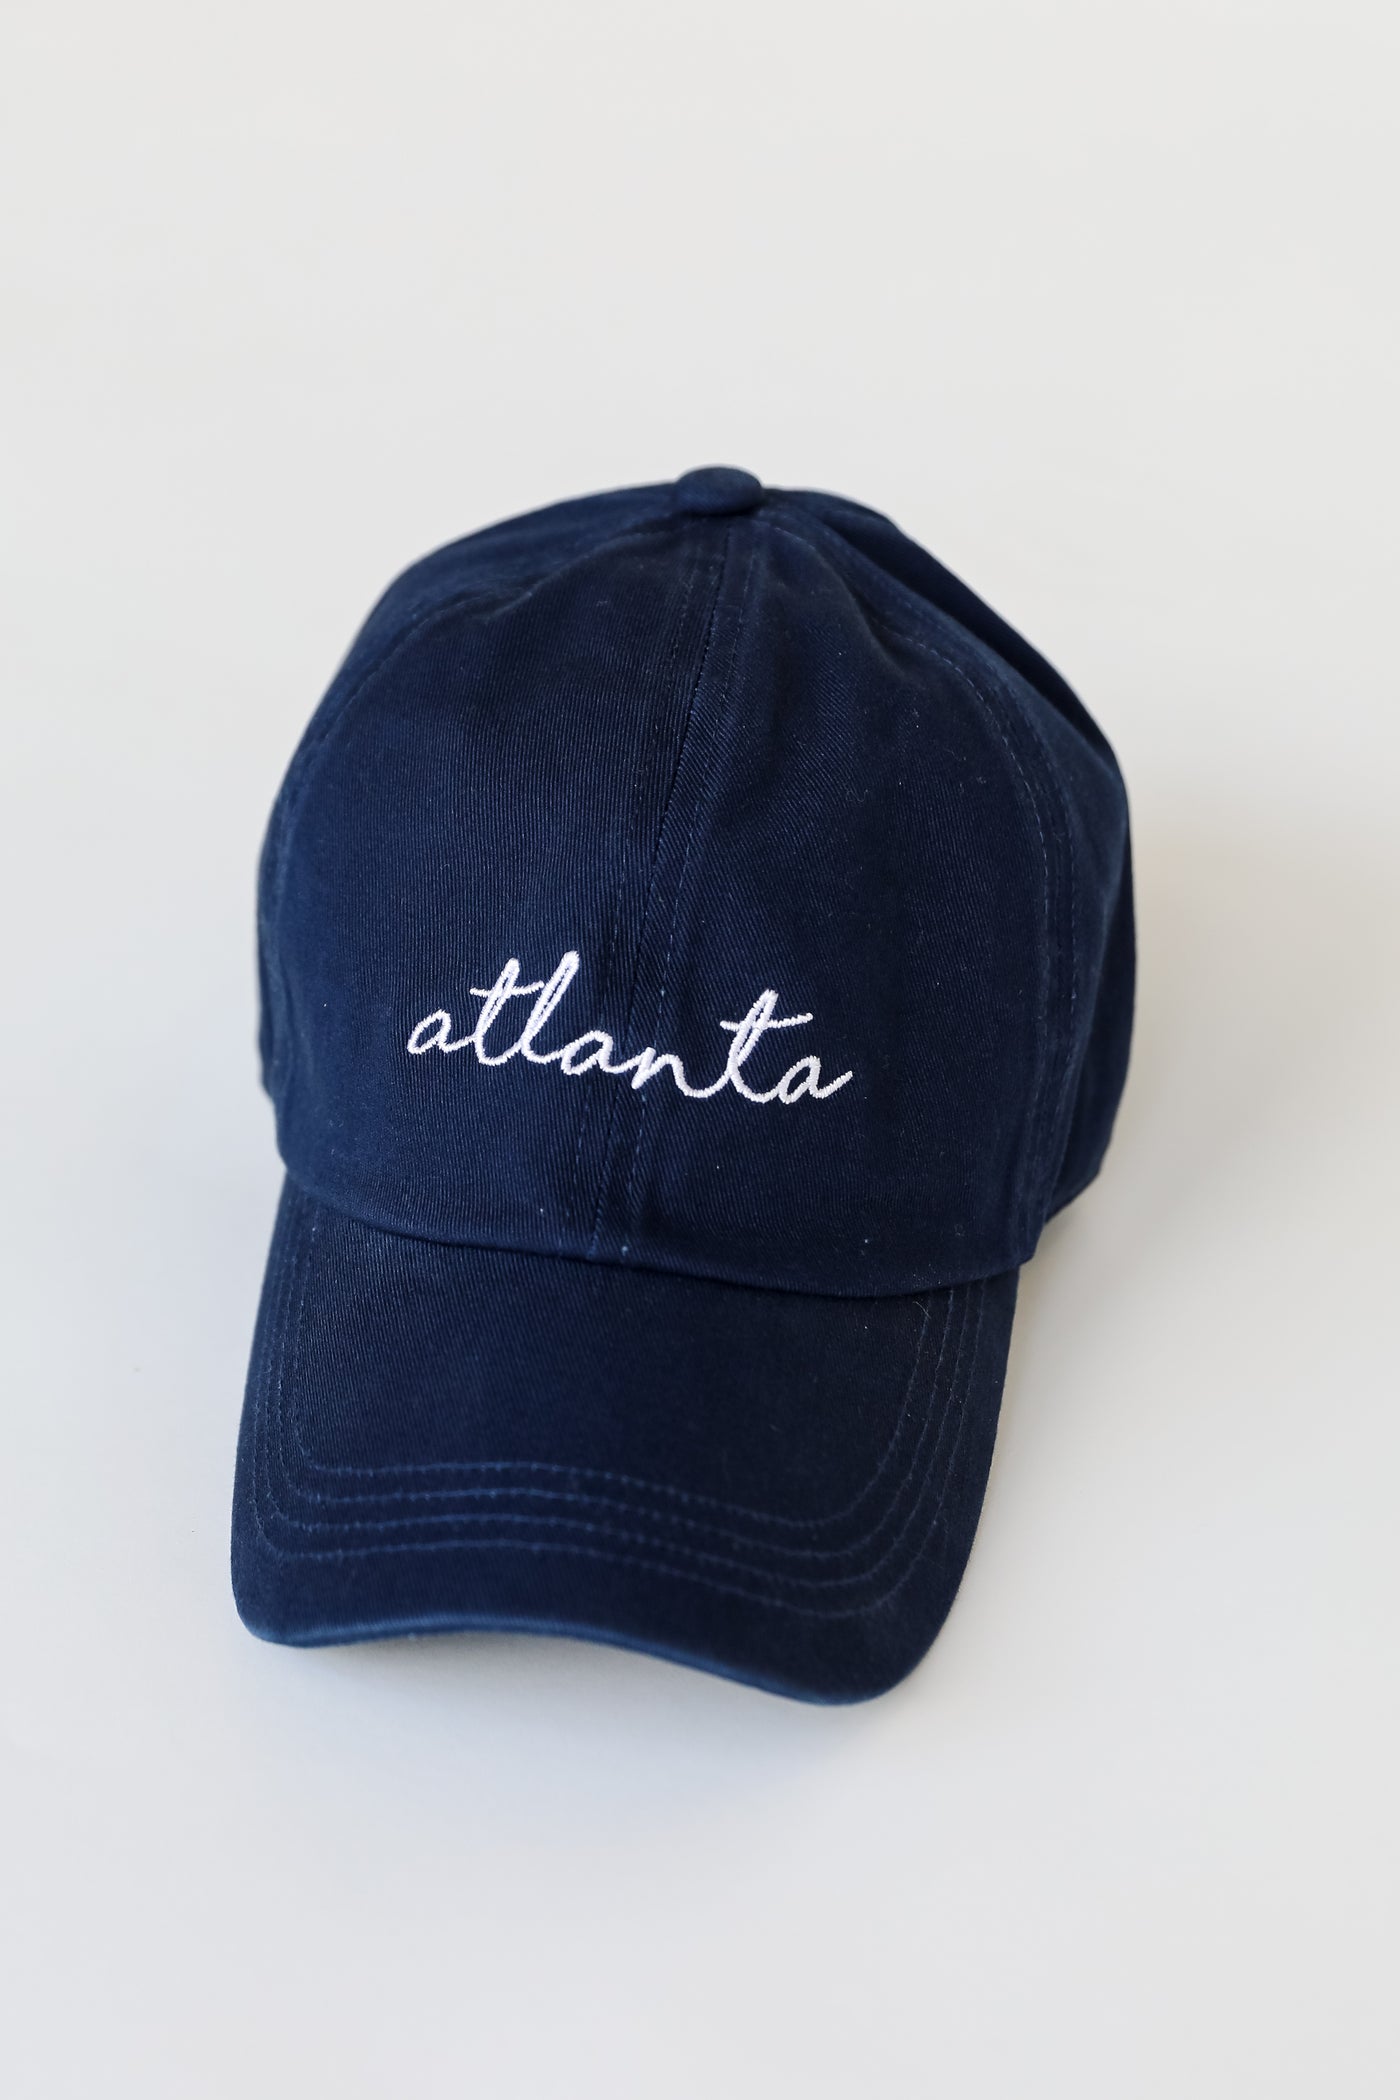 Atlanta Script Embroidered Hat in navy flat lay